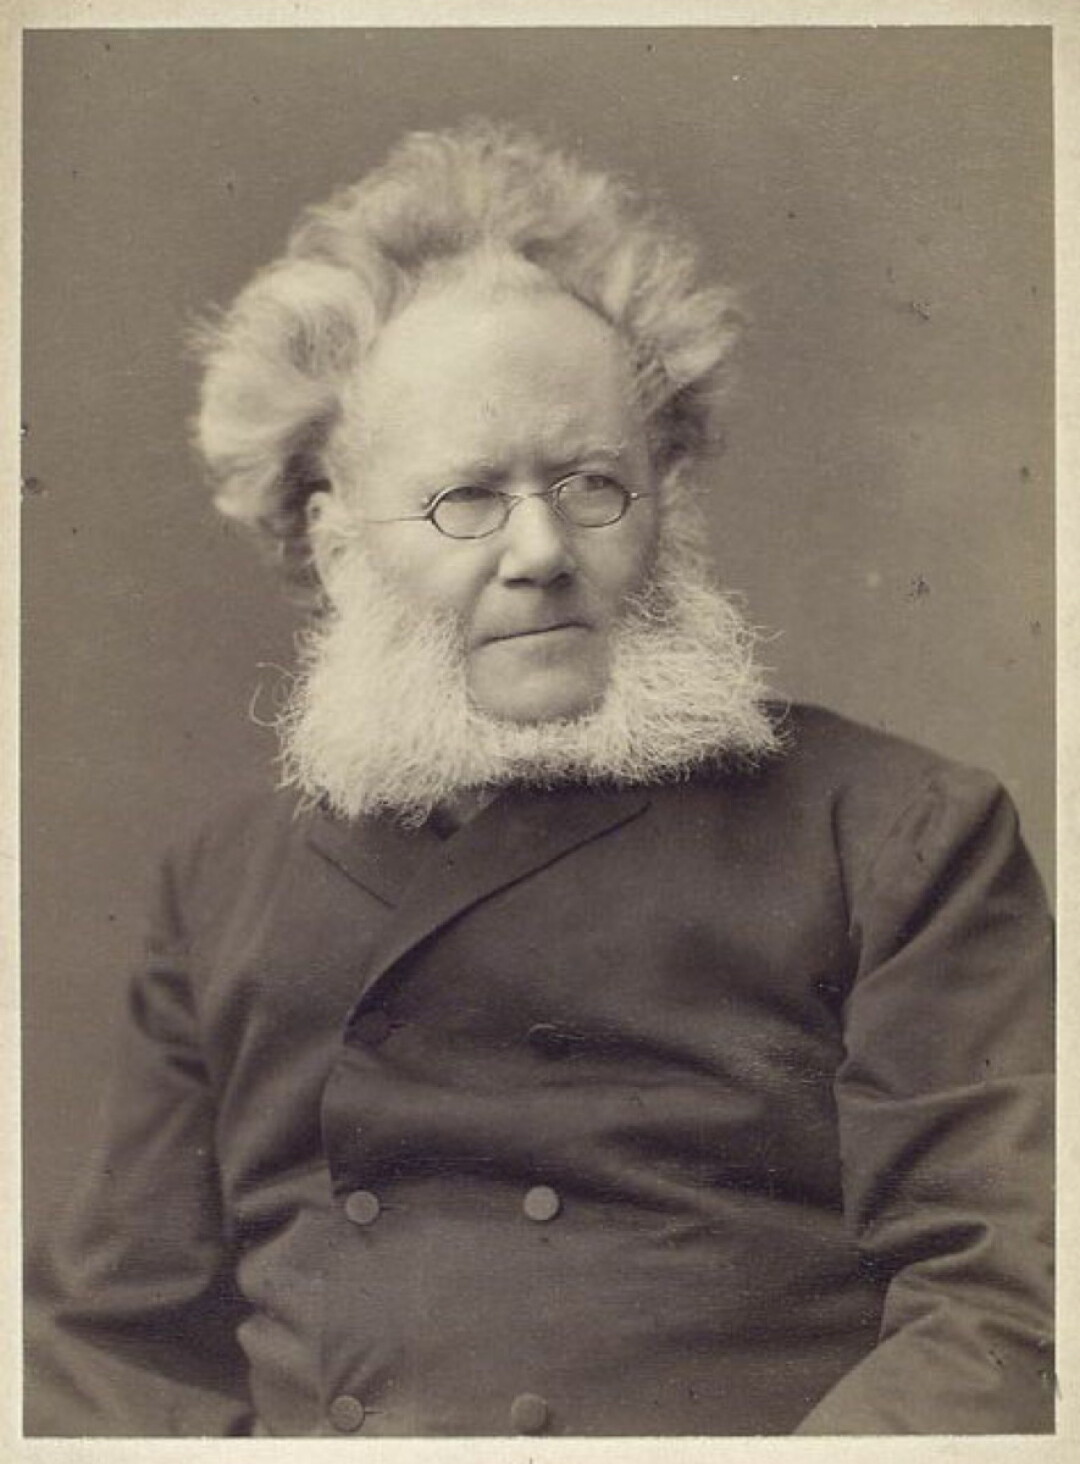 EVEN HIS HAIR WAS THEATRICAL. Henrik Ibsen is the second-most frequently performed playwright in the world, after Shakespeare.